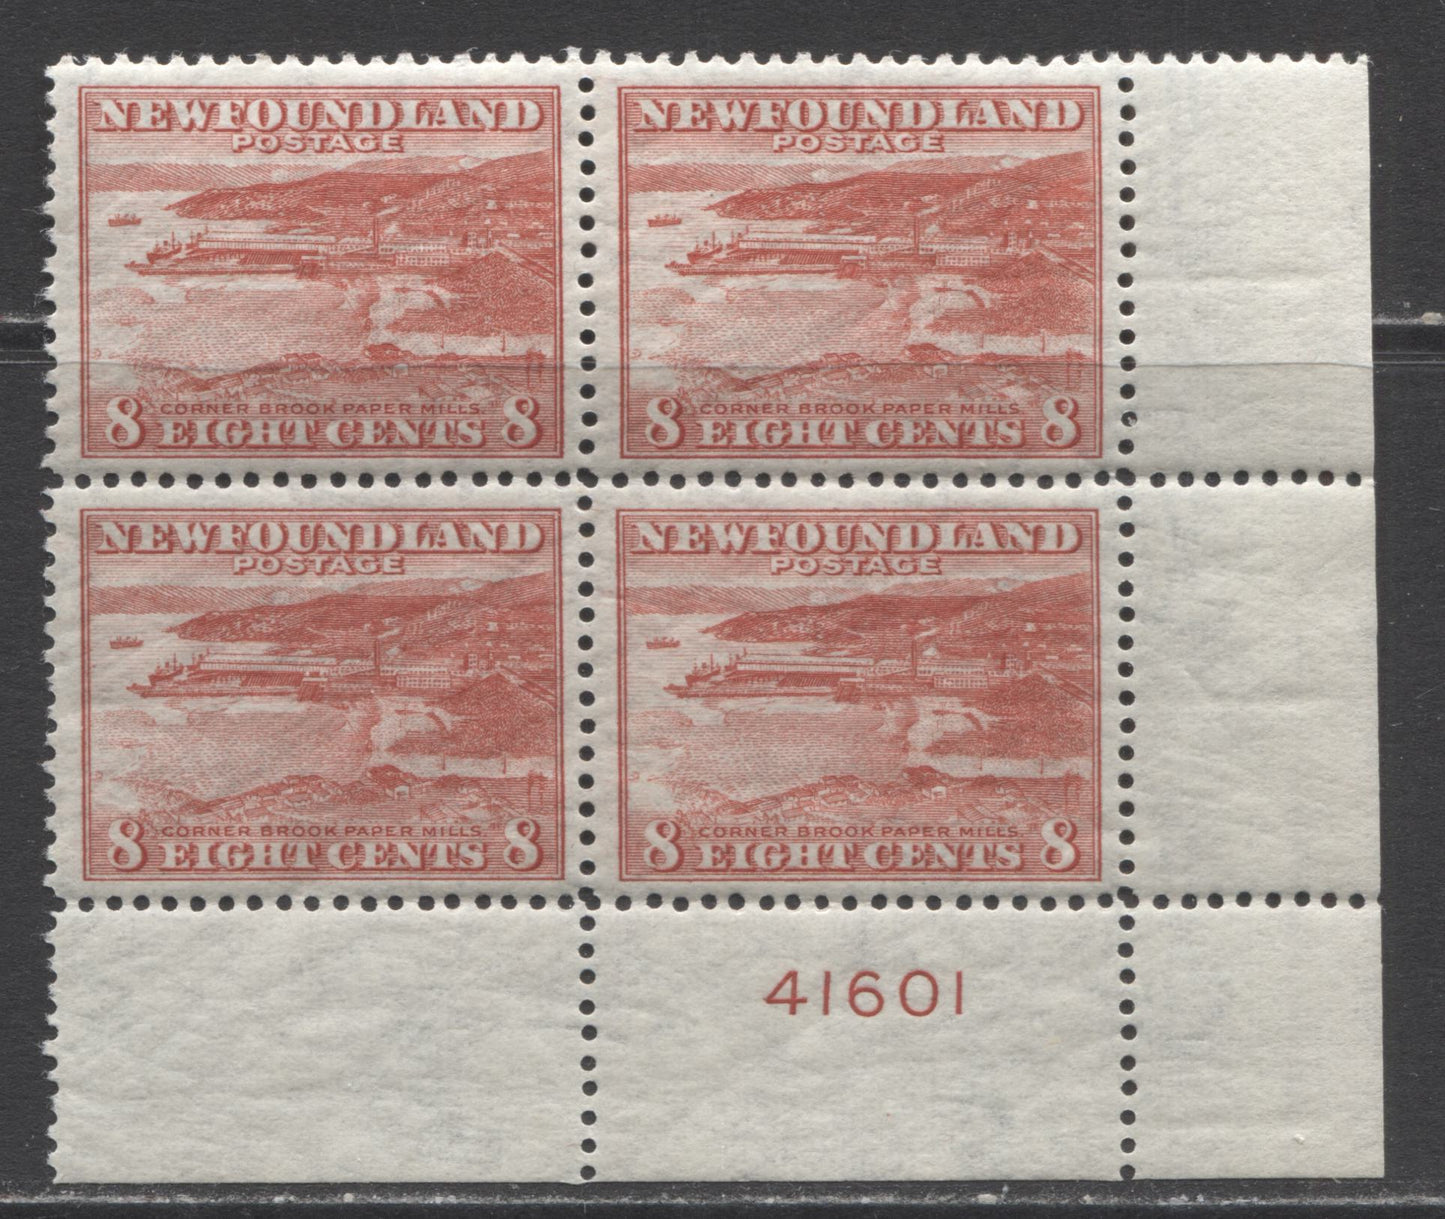 Lot 220 Newfoundland #259 8c Red Corner Brook Paper Mill, 1941-1944 Resources Re-Issue, A VFNH LR Plate 41601 Block Of 4